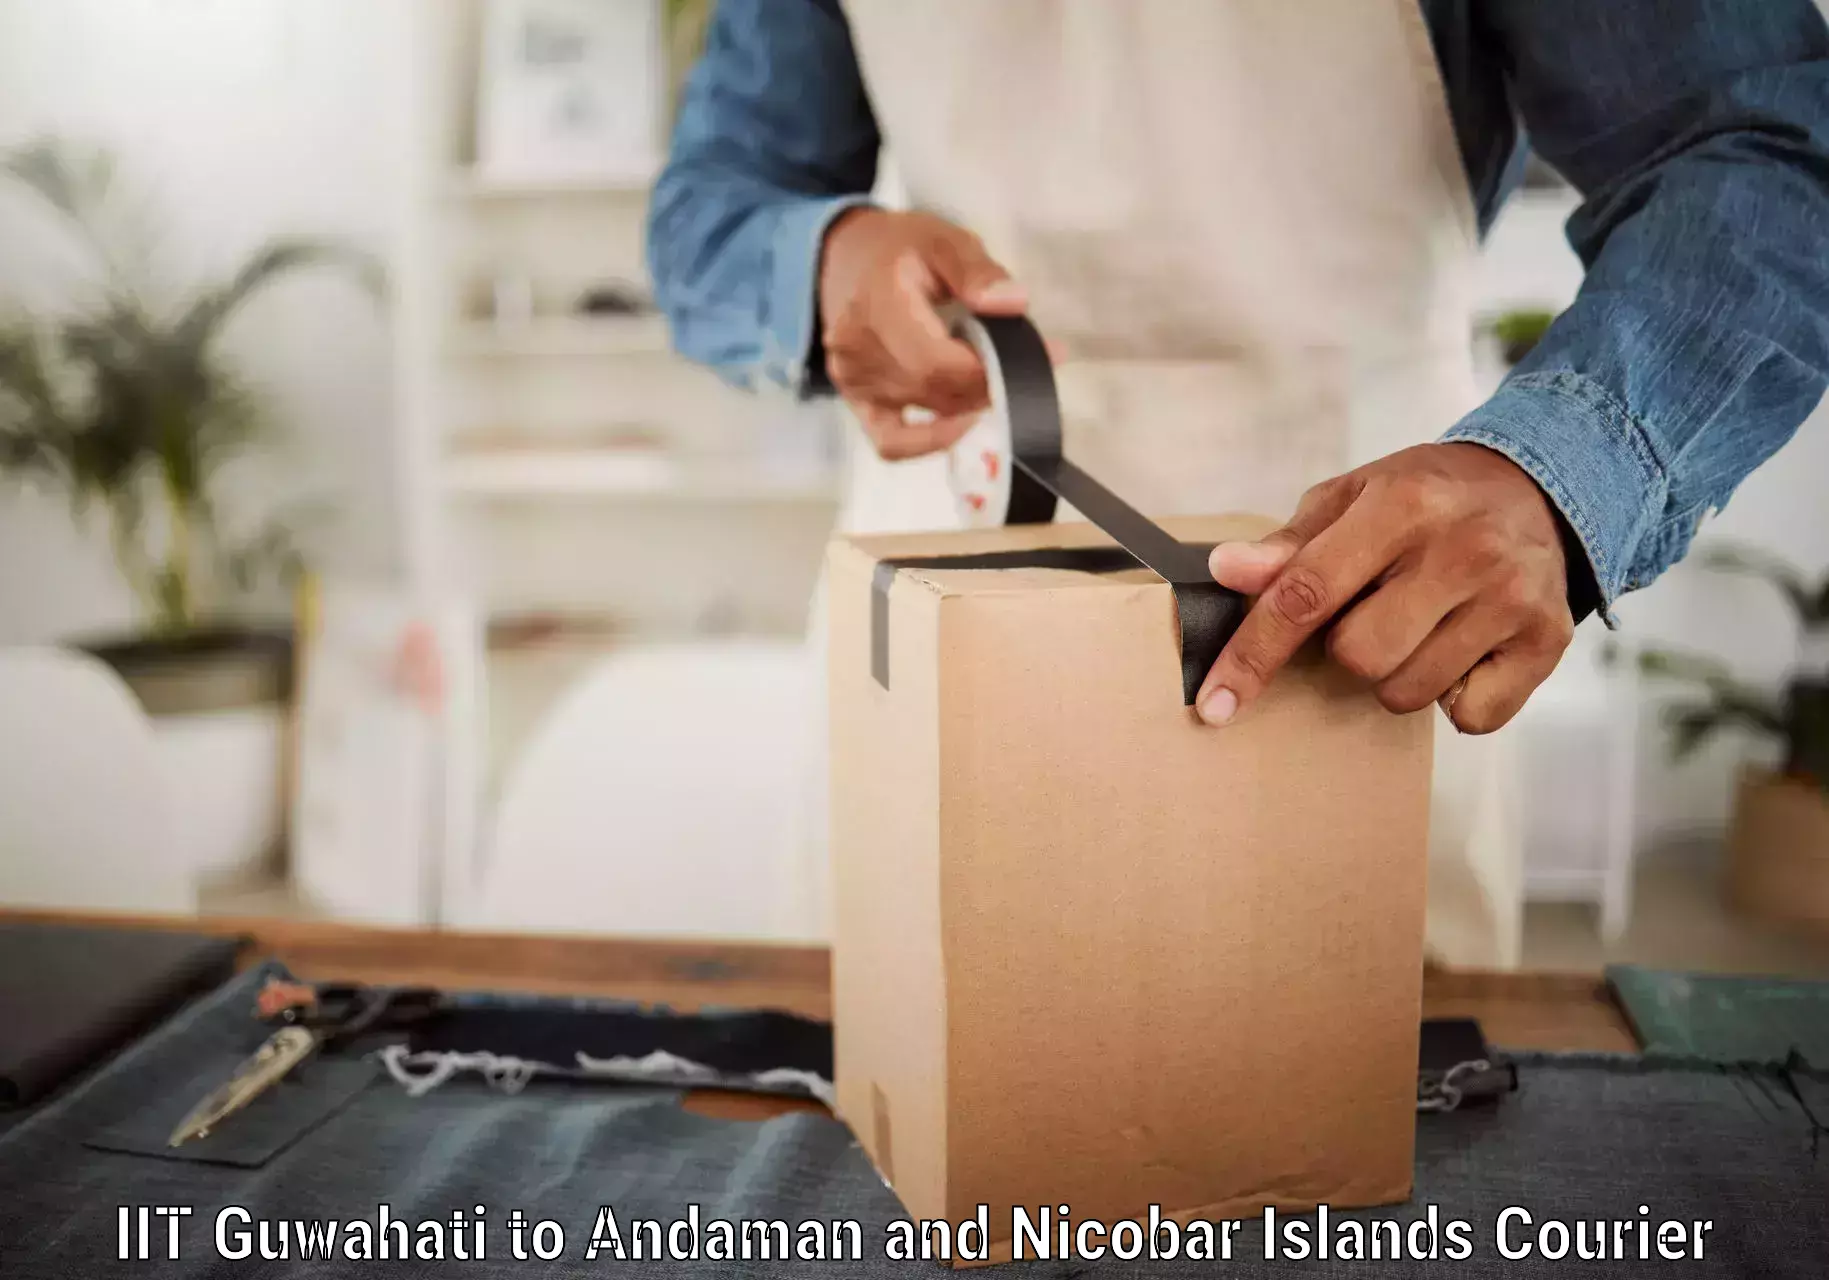 Professional courier handling IIT Guwahati to North And Middle Andaman